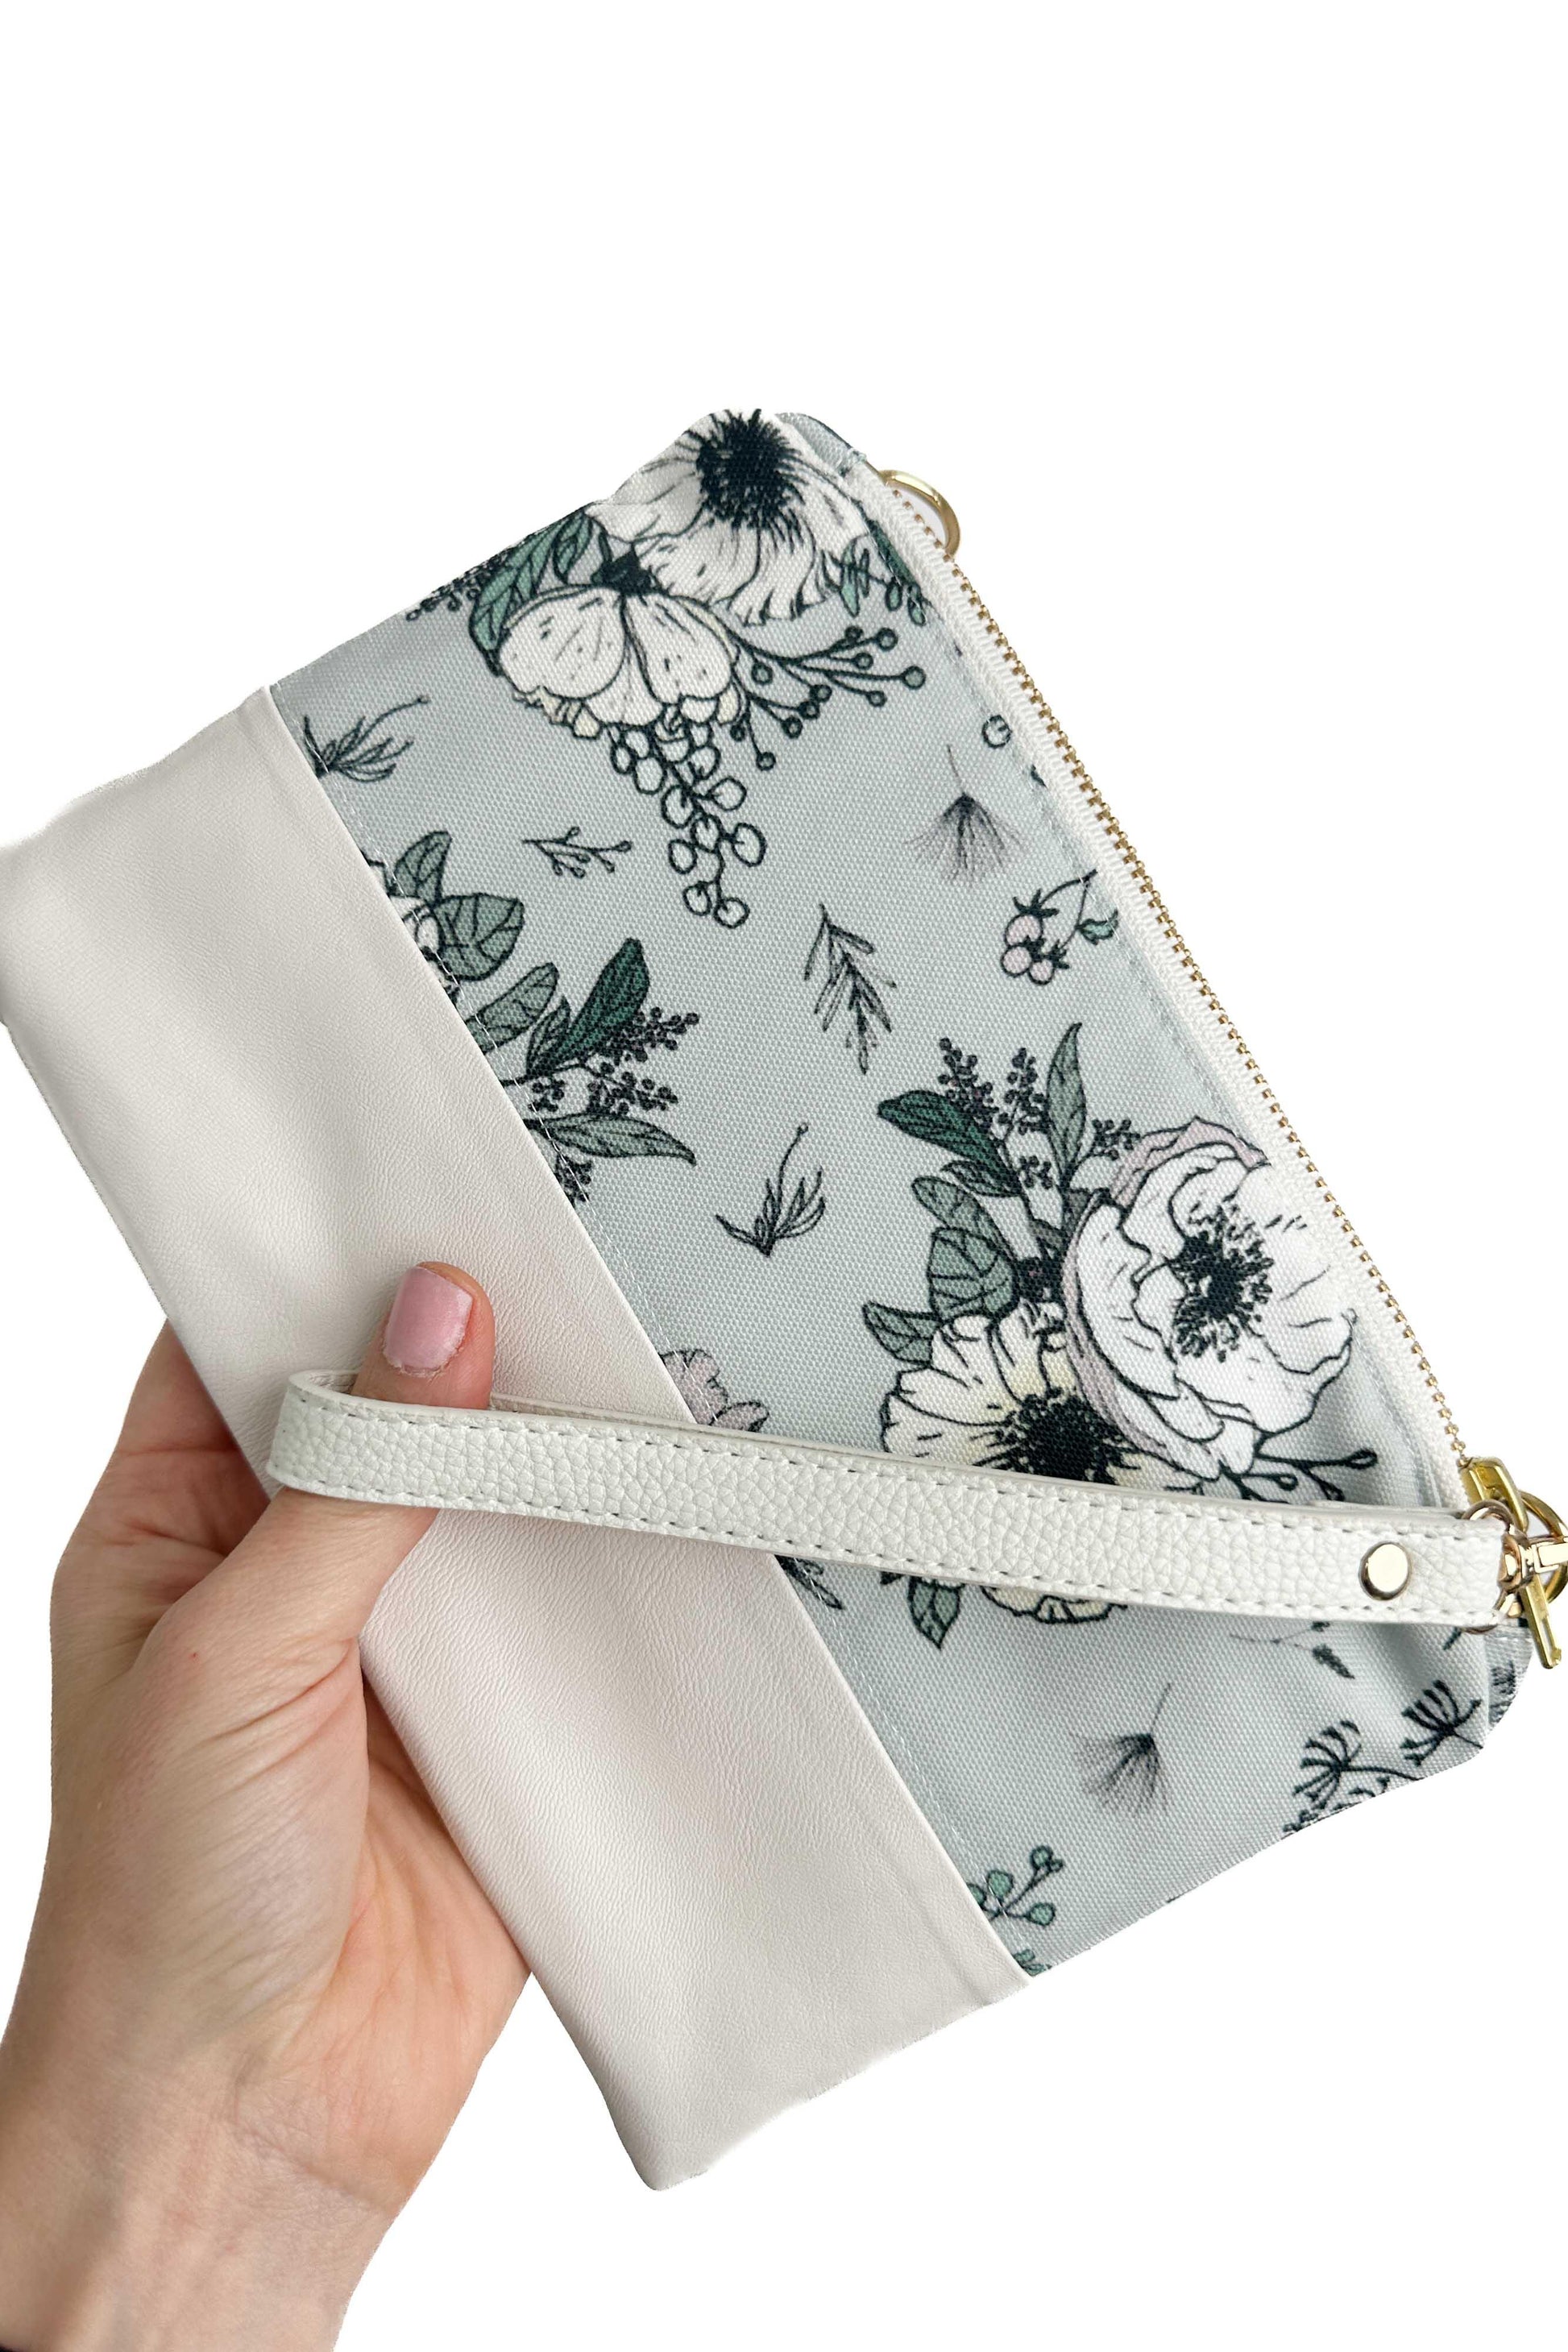 Modern Poppy Convertible Crossbody Wristlet+ with Compartments READY TO SHIP - Modern Makerie